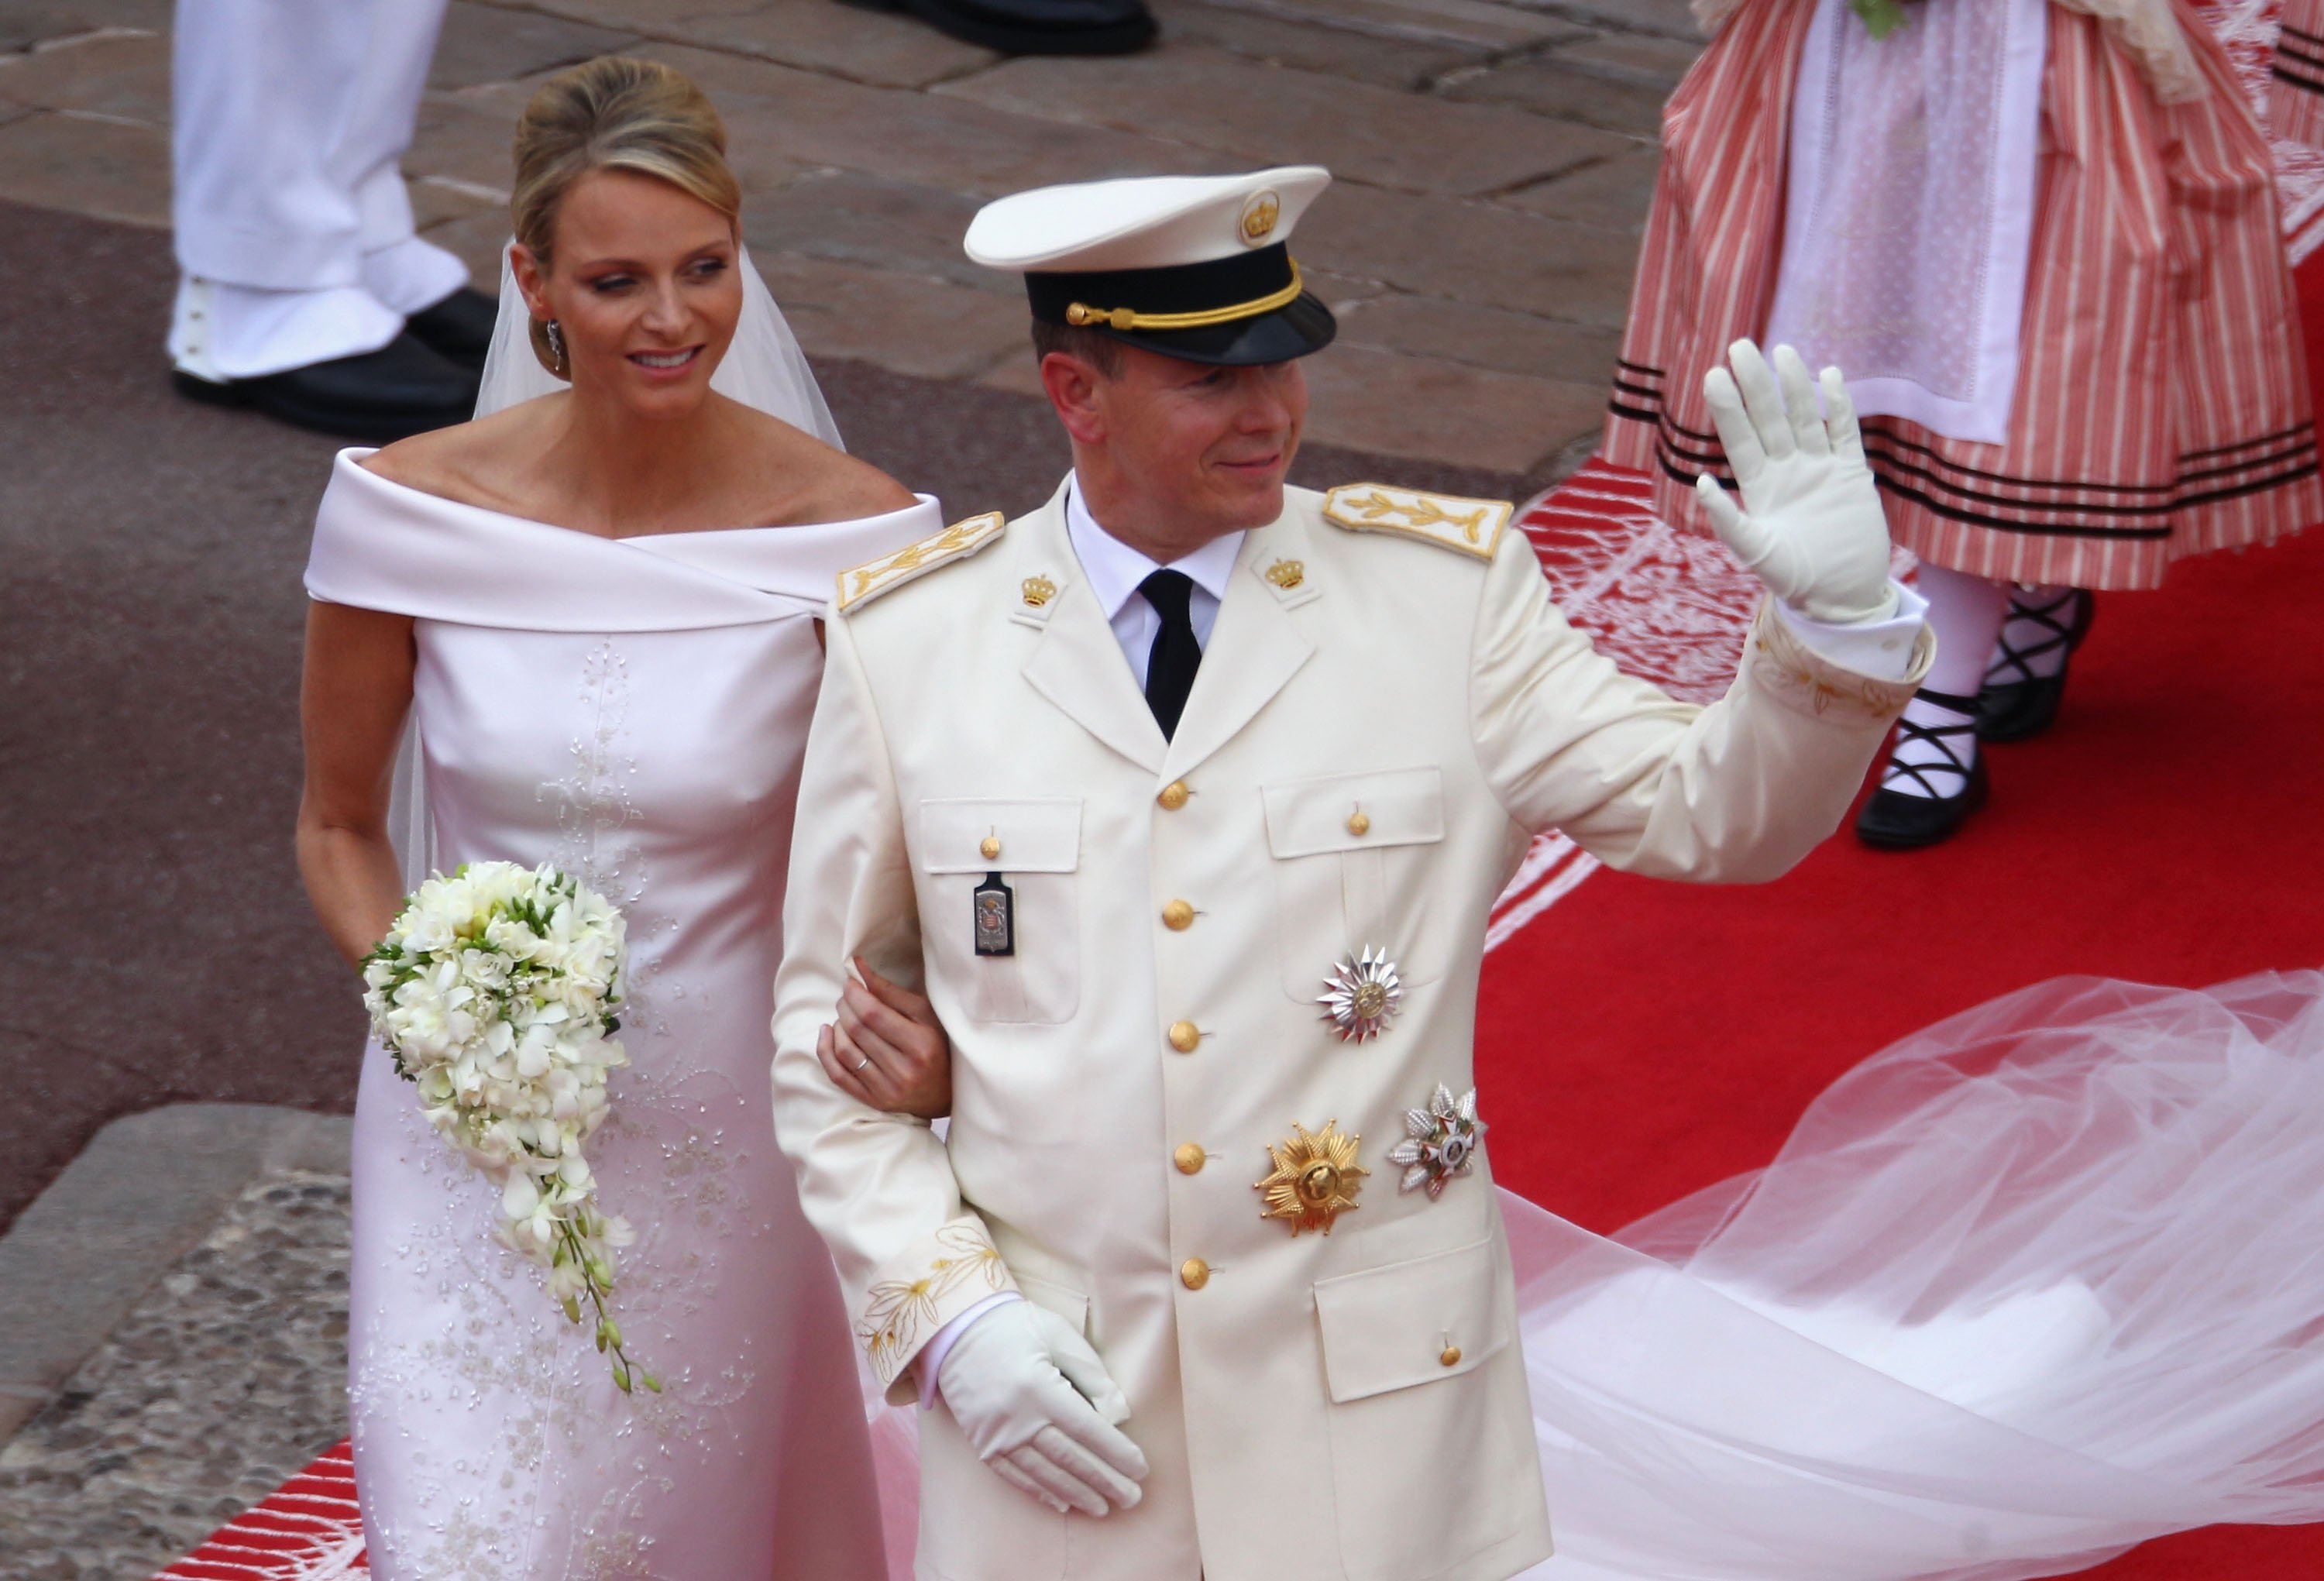 Princess Charlene and Prince Albert II of Monaco on their wedding day, July, 2011. | Photo: Getty Images.